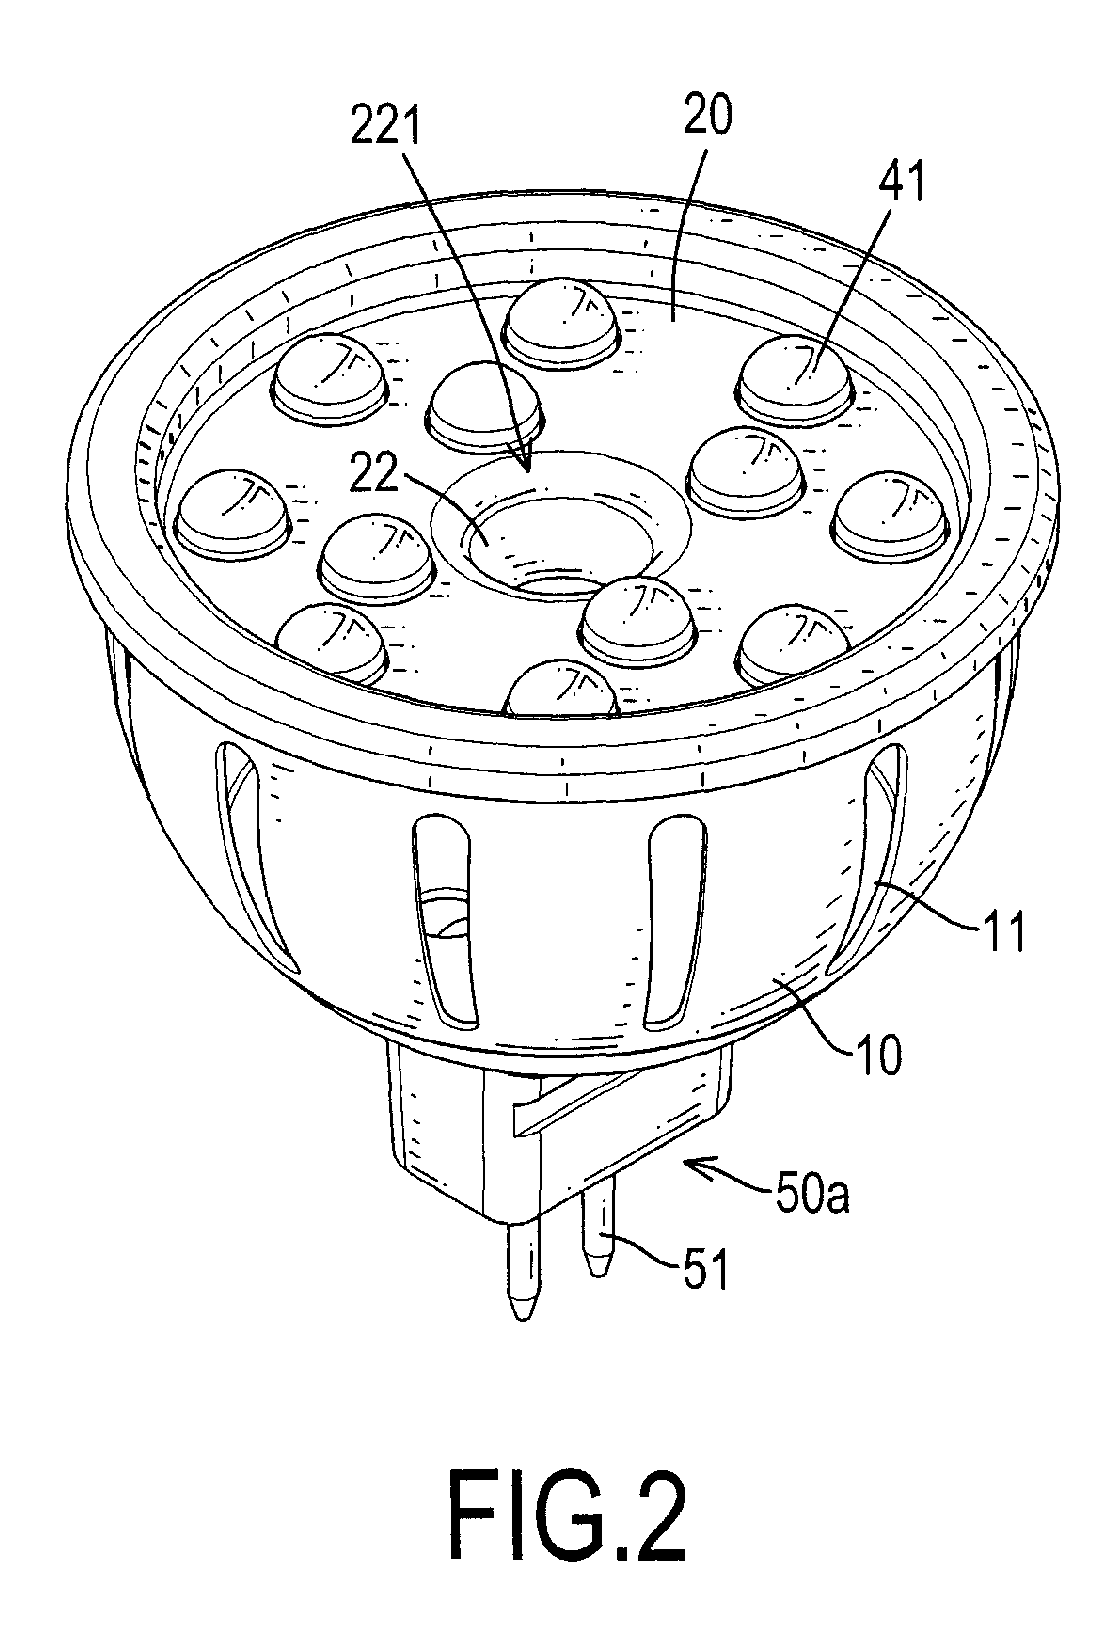 LED lighting device having heat convection and heat conduction effects and heat dissipating assembly therefor